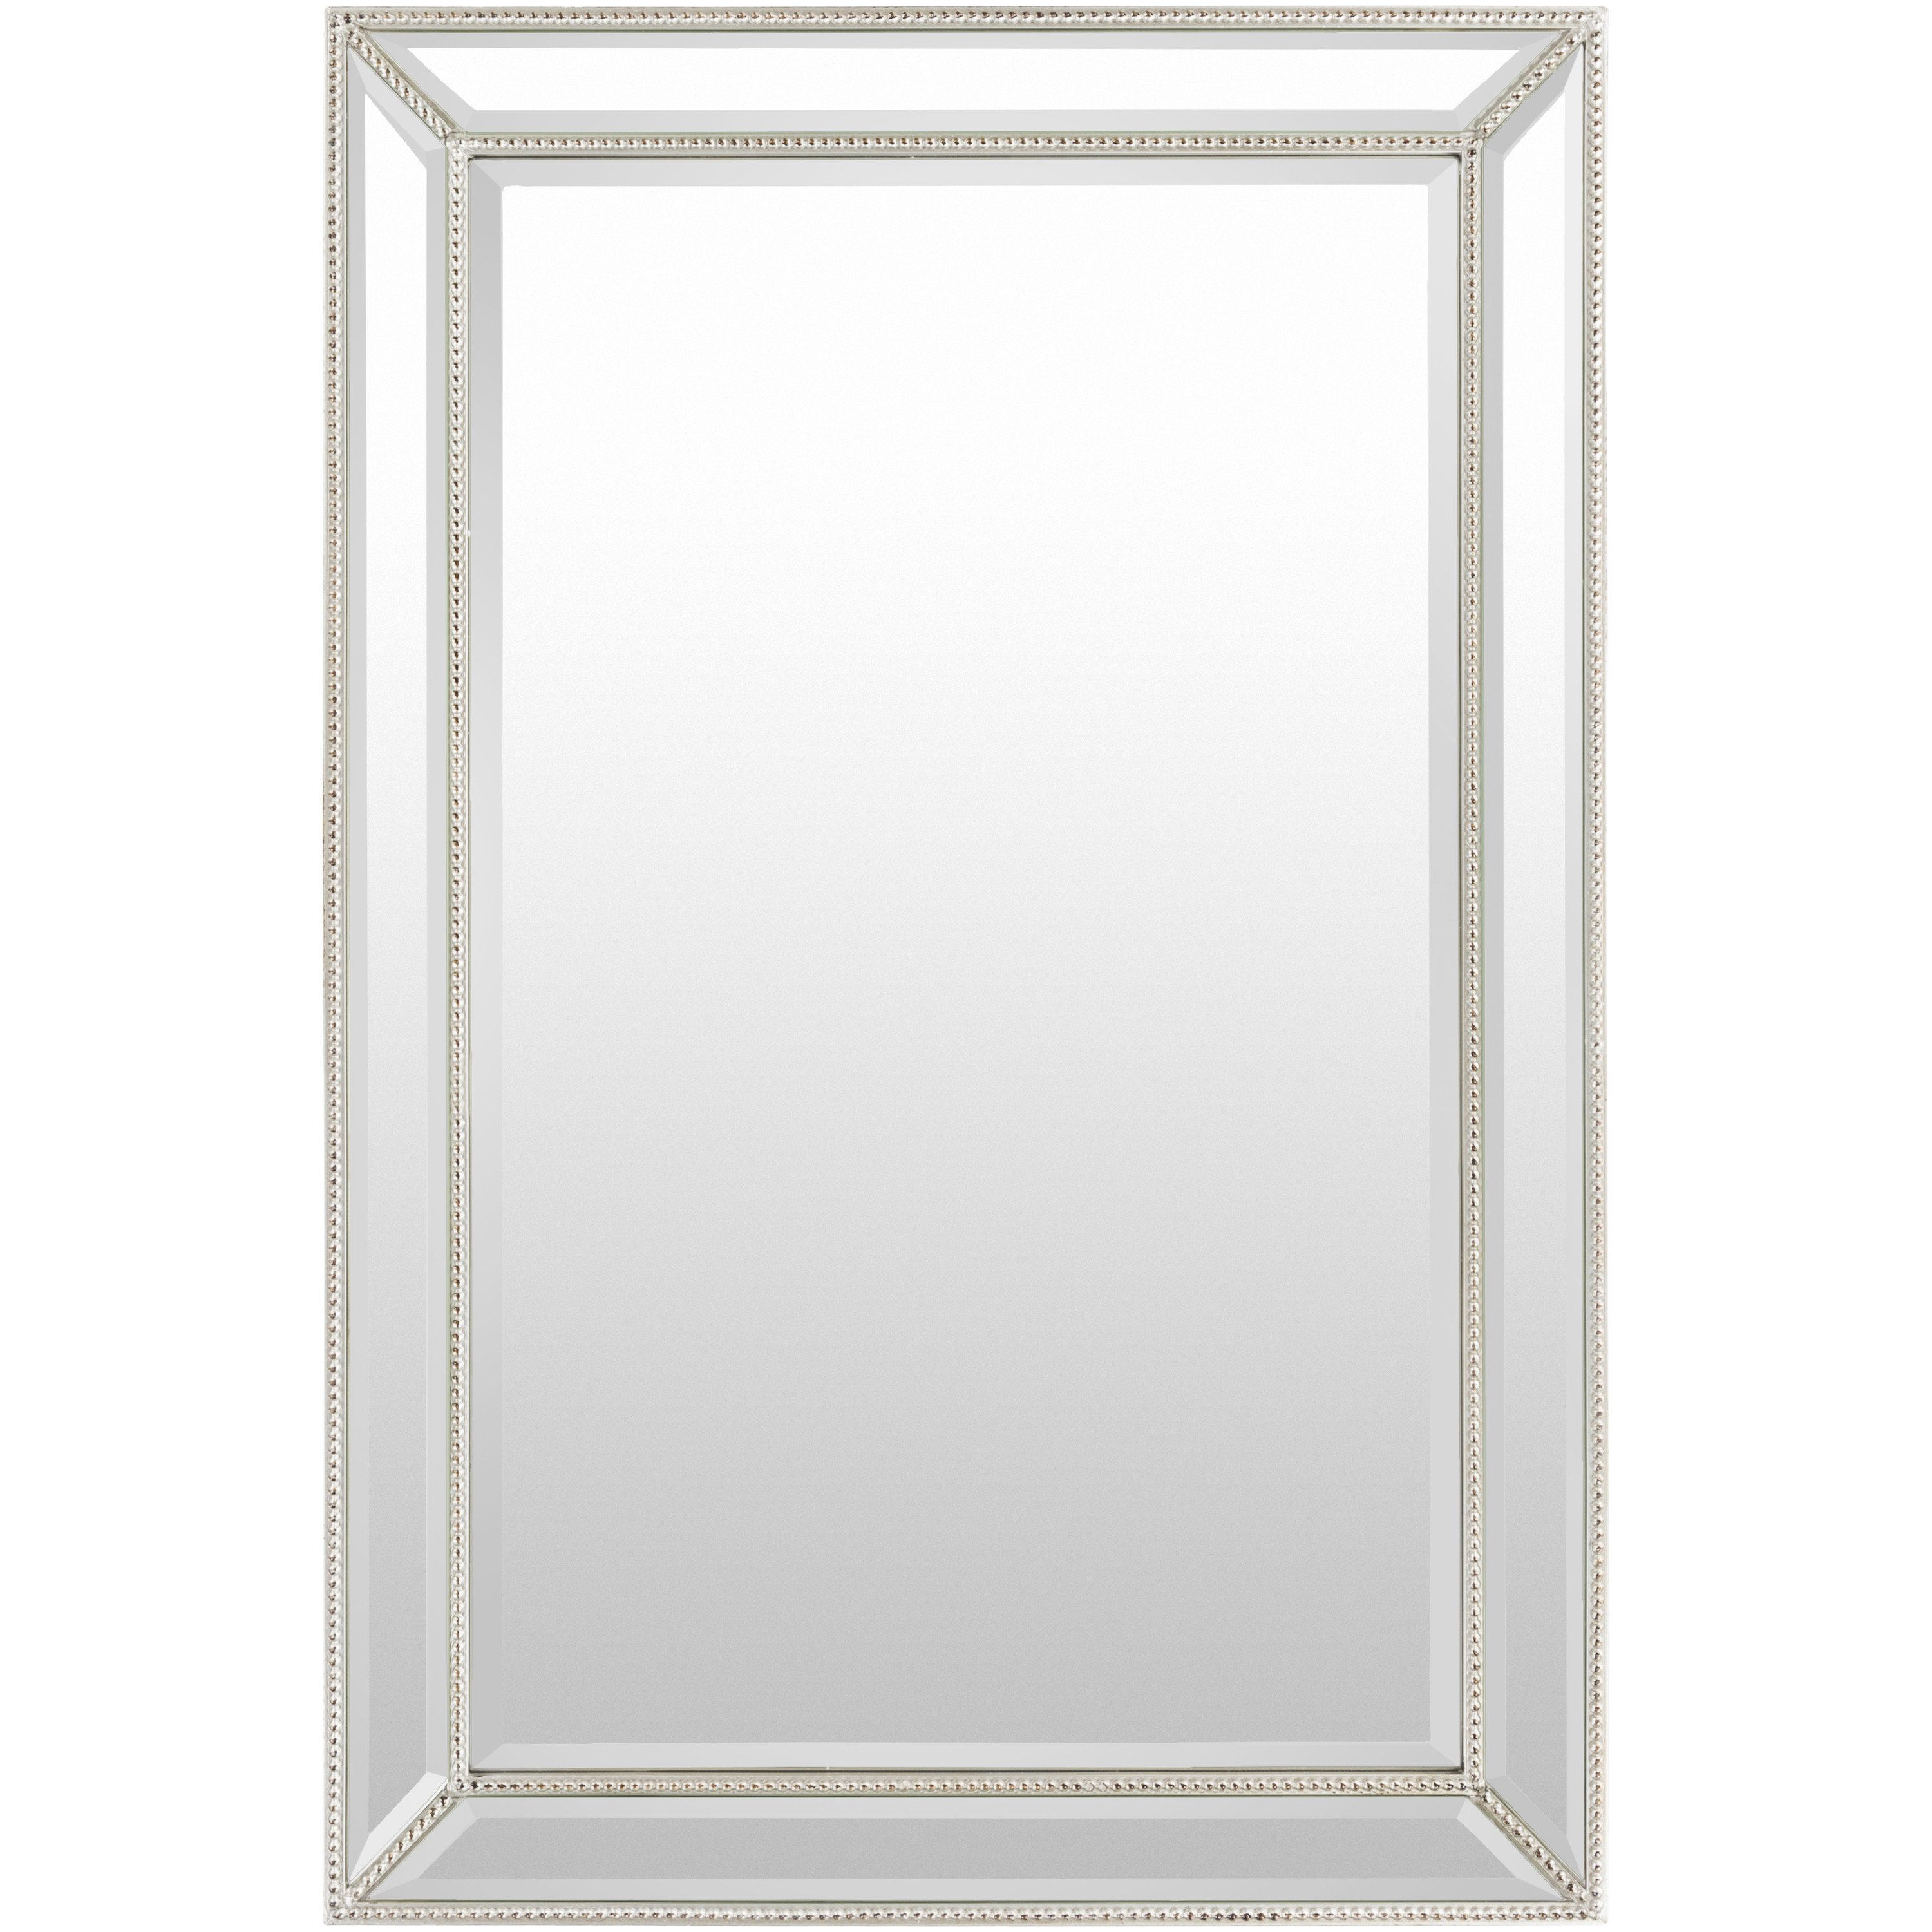 Tutuala Traditional Beveled Accent Mirror In Traditional Beveled Accent Mirrors (View 11 of 20)